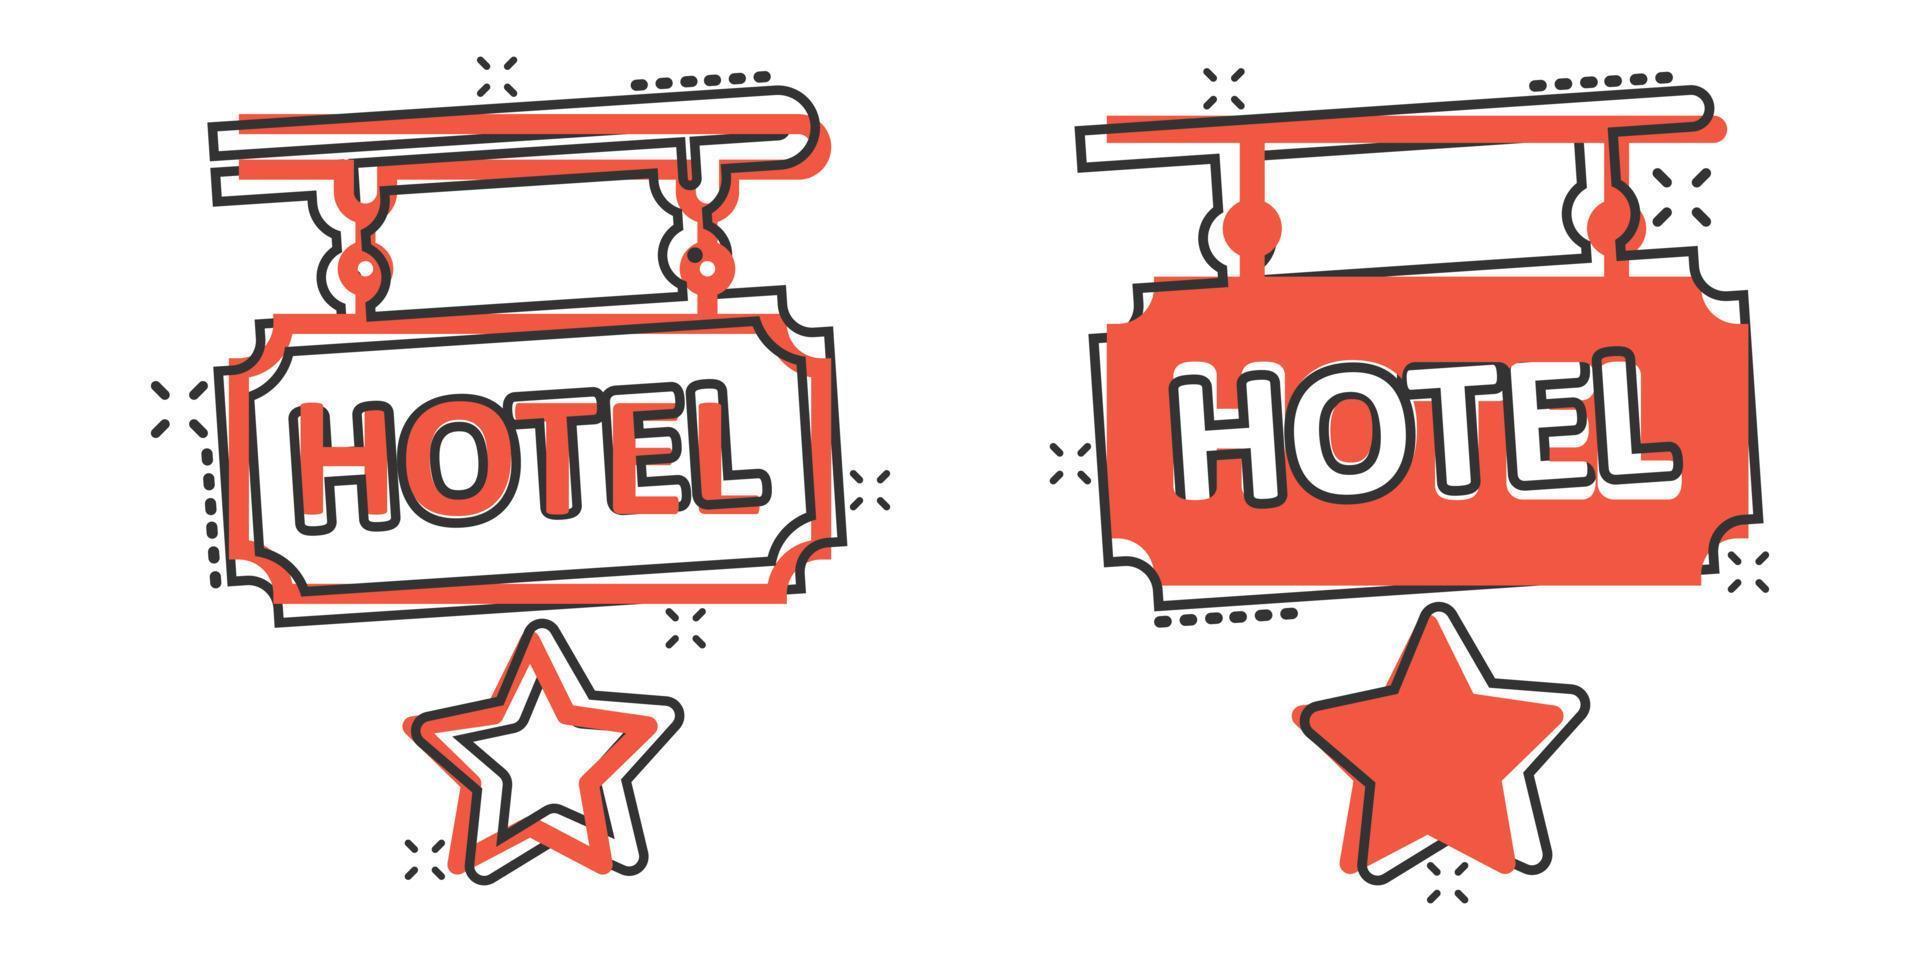 Hotel 1 star sign icon in comic style. Inn cartoon vector illustration on white isolated background. Hostel room information splash effect business concept.